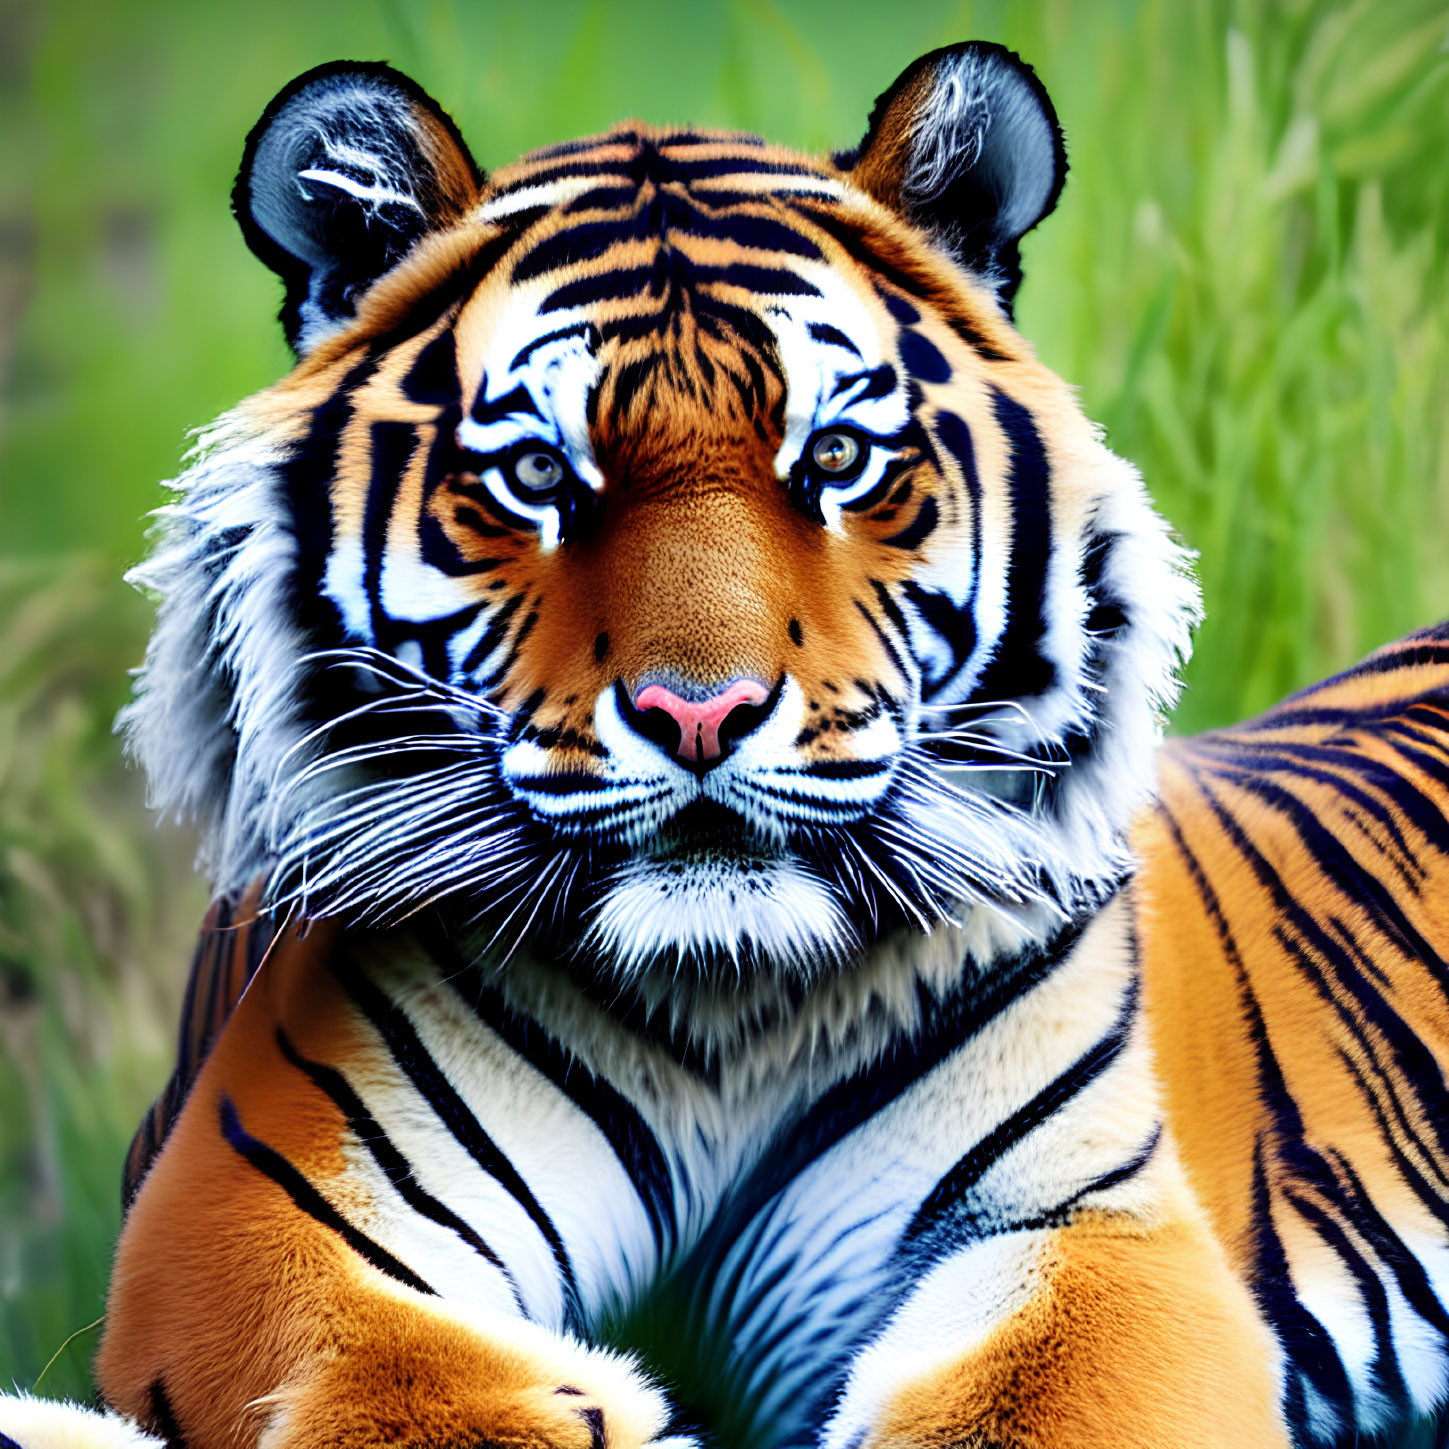 Close-up of tiger with vivid orange and black stripes and sharp eyes against blurred green background